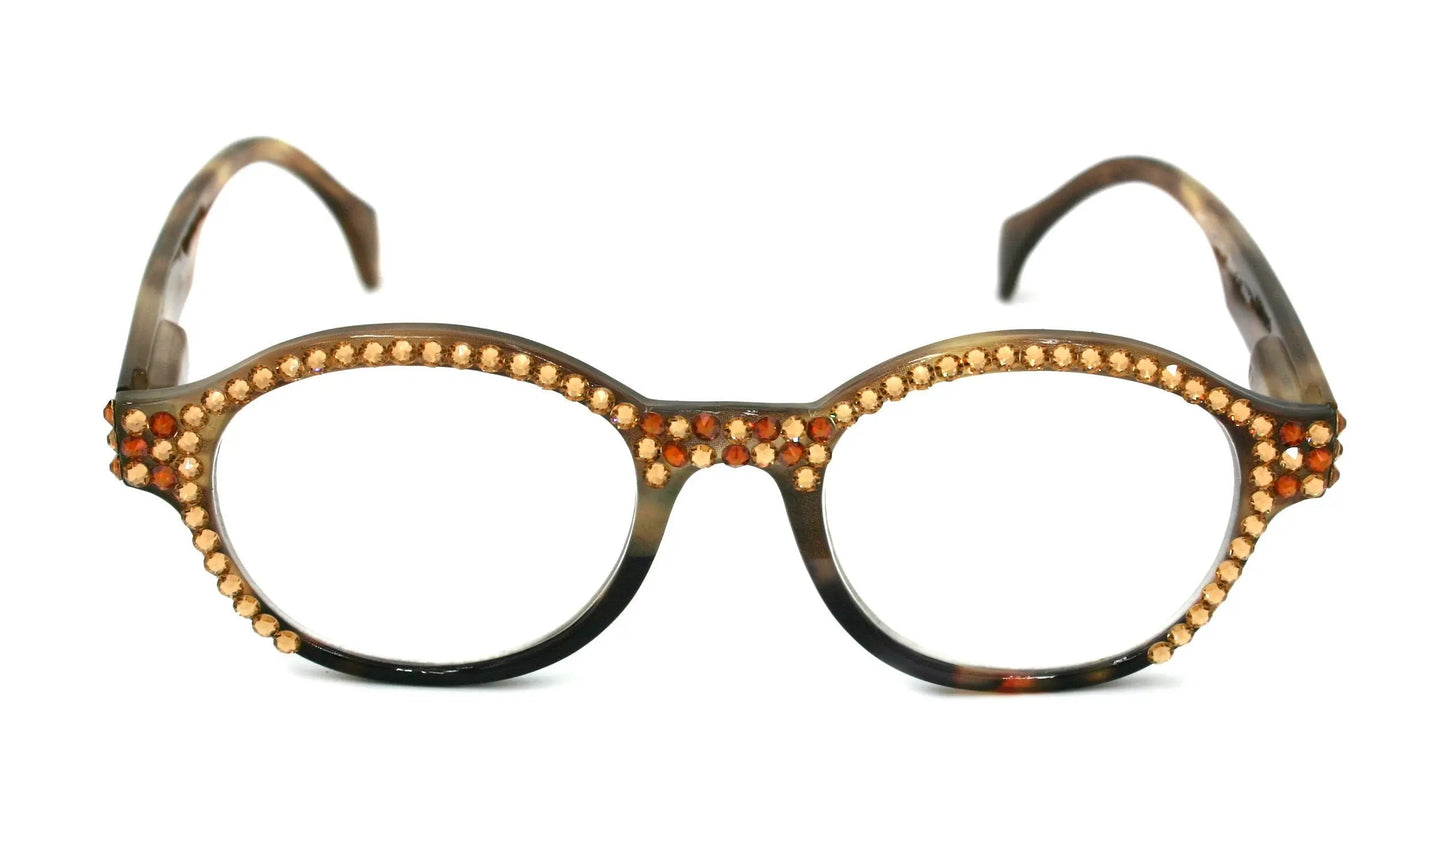 The Alchemist, (Bling) Round Women Reading Glasses W (L. Colorado, Cooper) Genuine European Crystals (Marble Brown) NY Fifth Avenue 